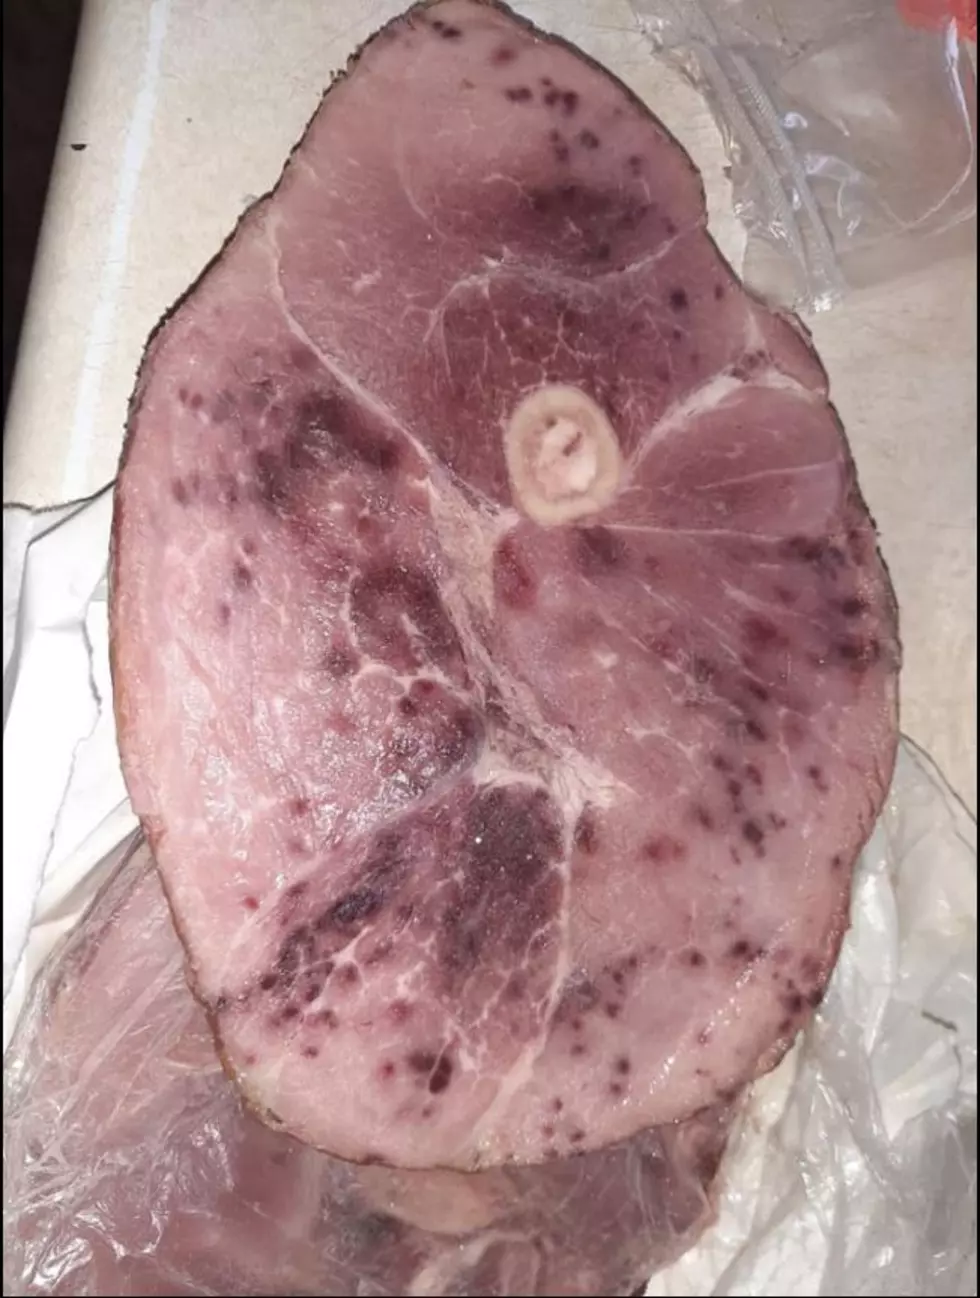 Is It Still Safe To Eat My Easter Ham If It Looks Like This?